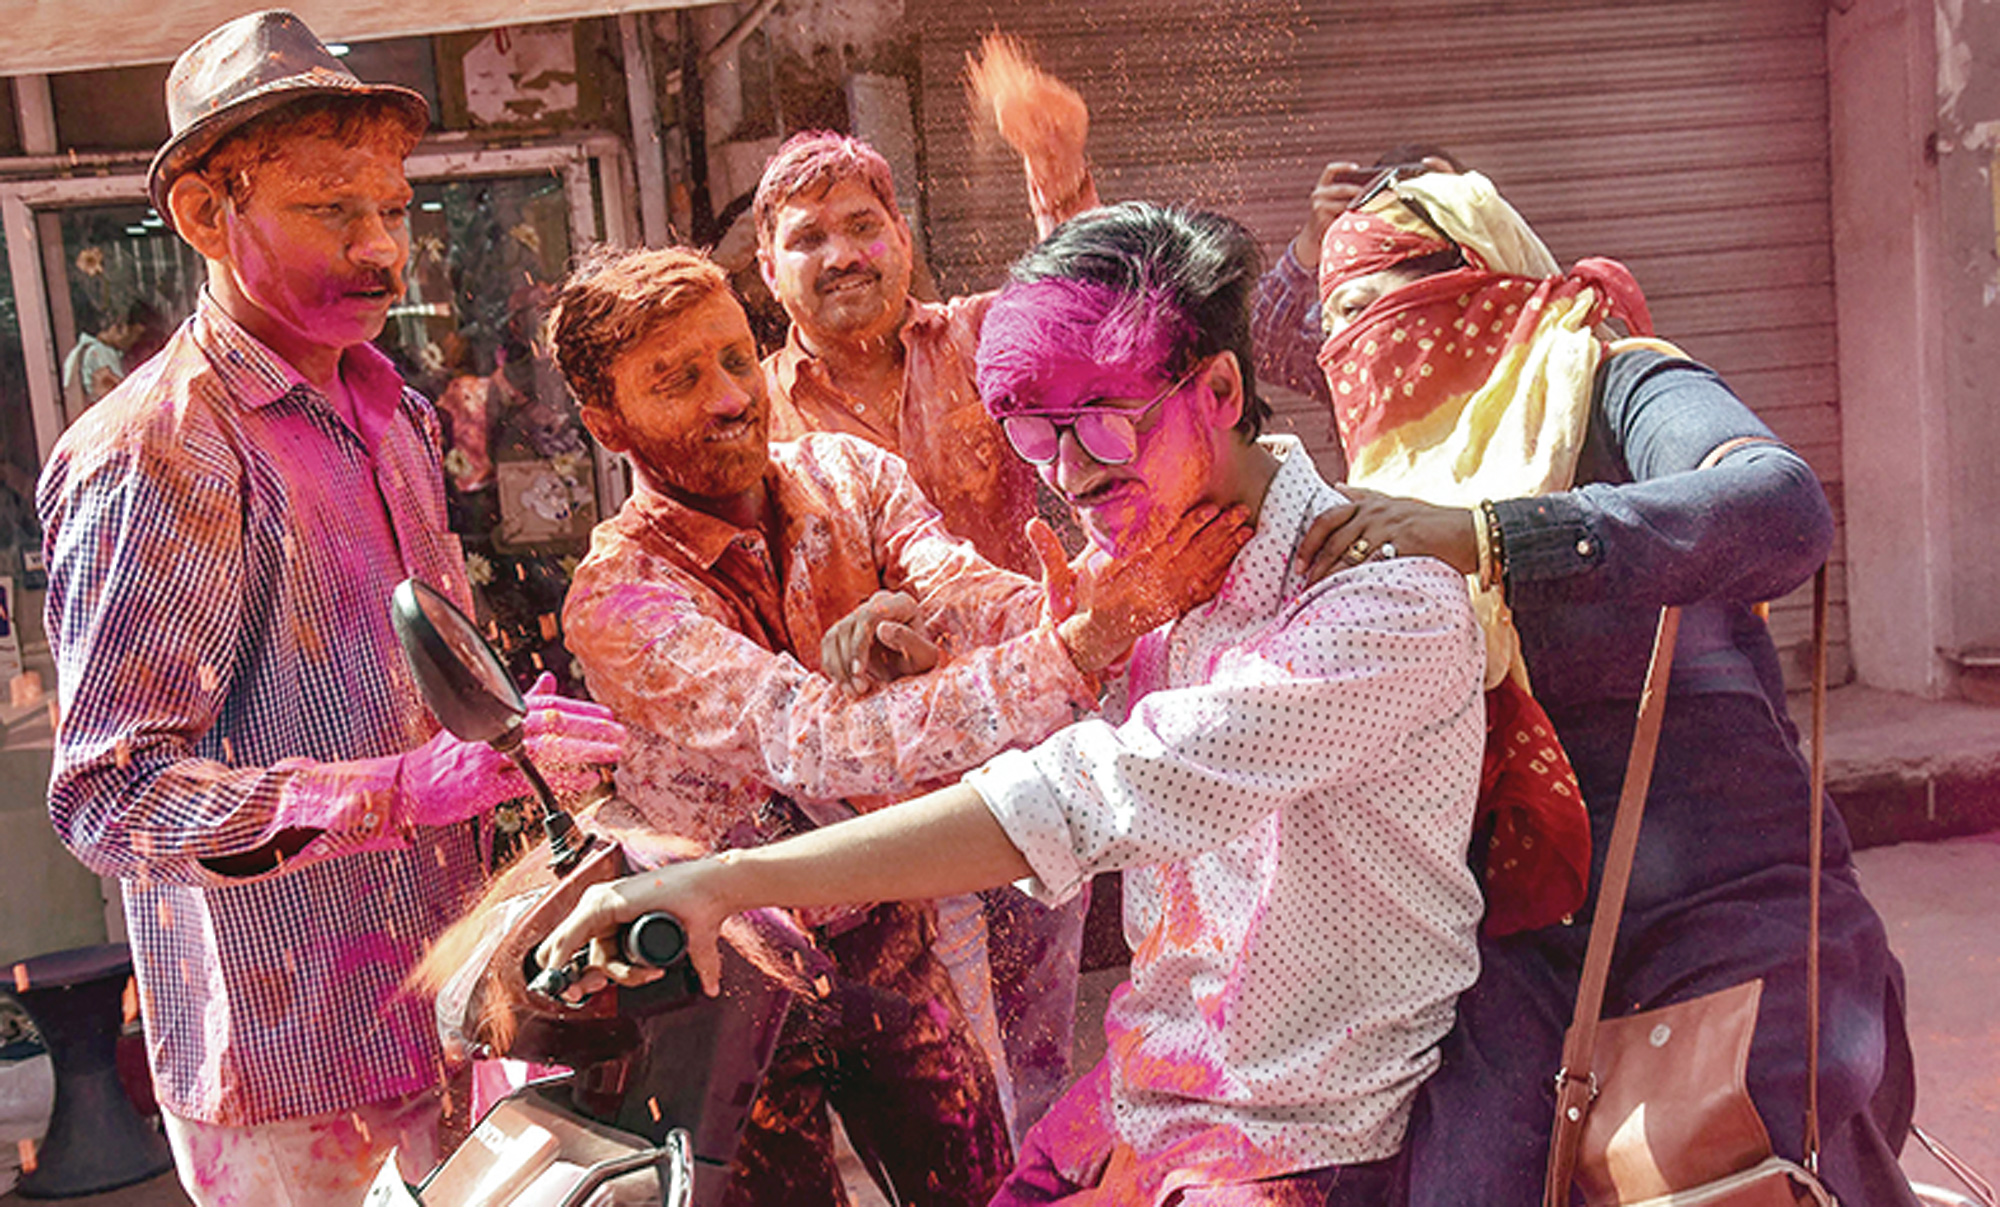 Holi celebrations in Lucknow on Wednesday, March 20, 2019. Of course, the small matter of taking permission before smearing unsuspecting citizens with garish colours does not strike either law-keepers or law-breakers as an offence